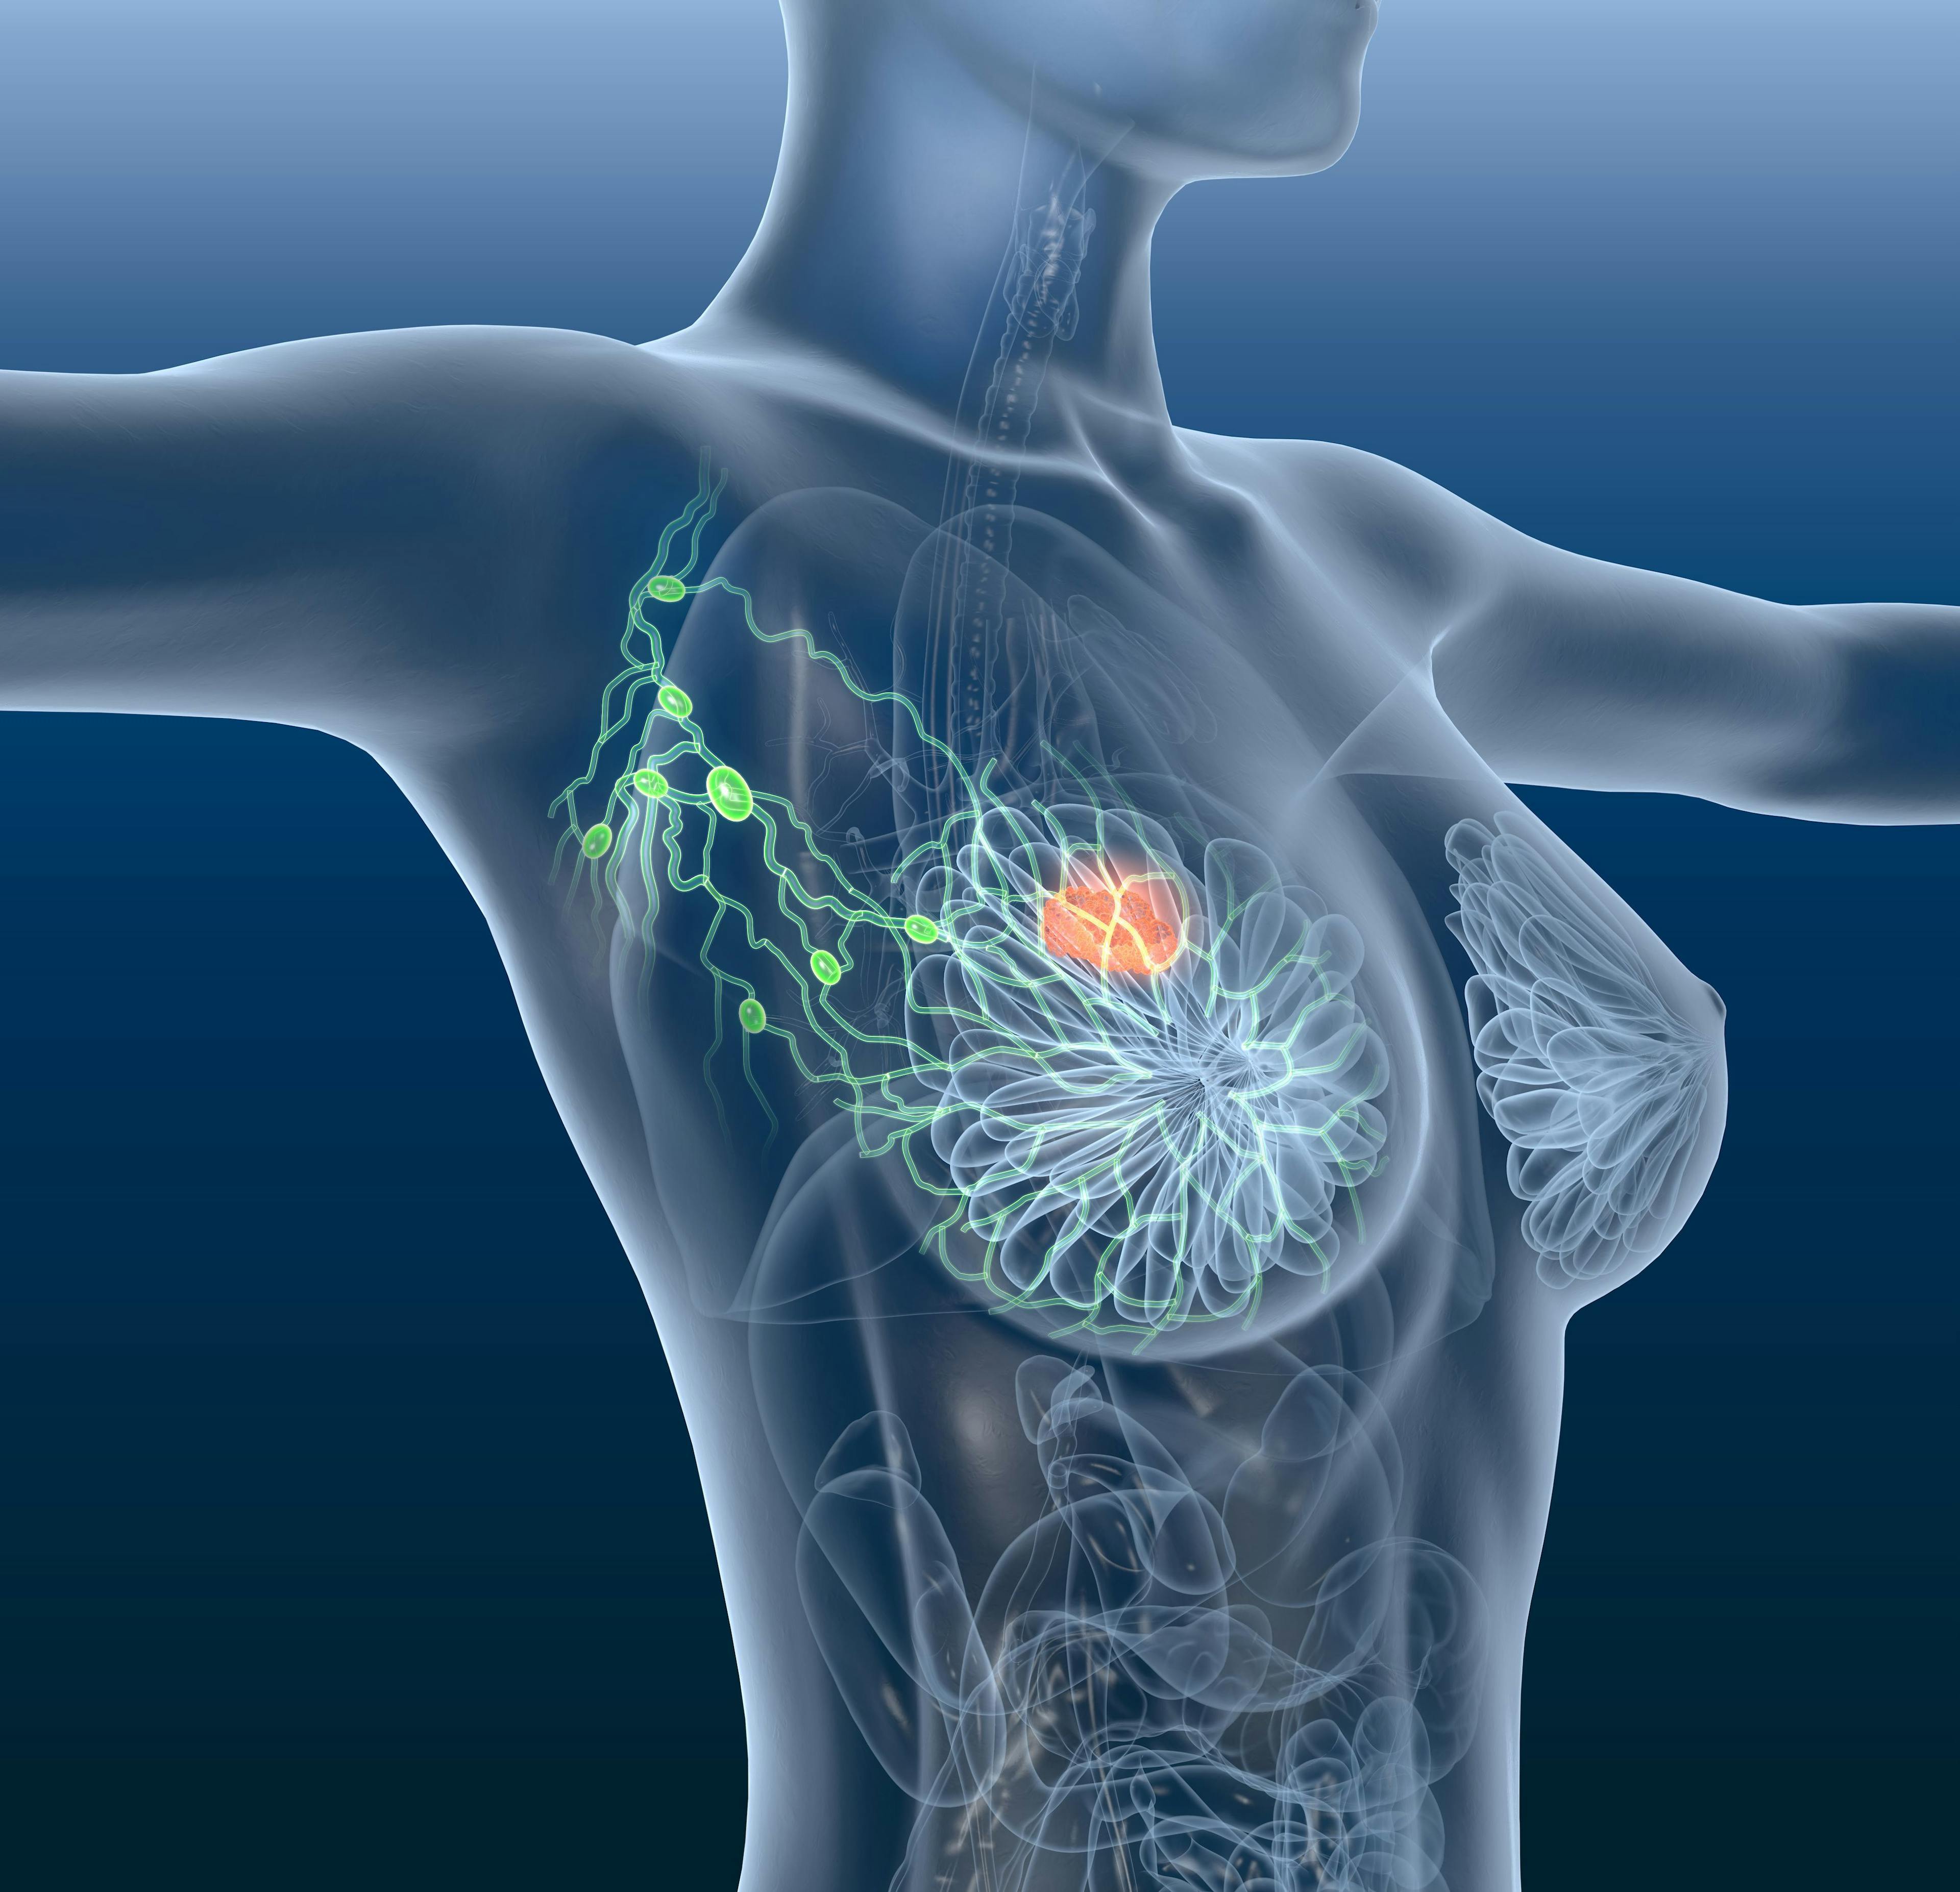 New Deep Learning Model Predicts Breast Cancer Risk